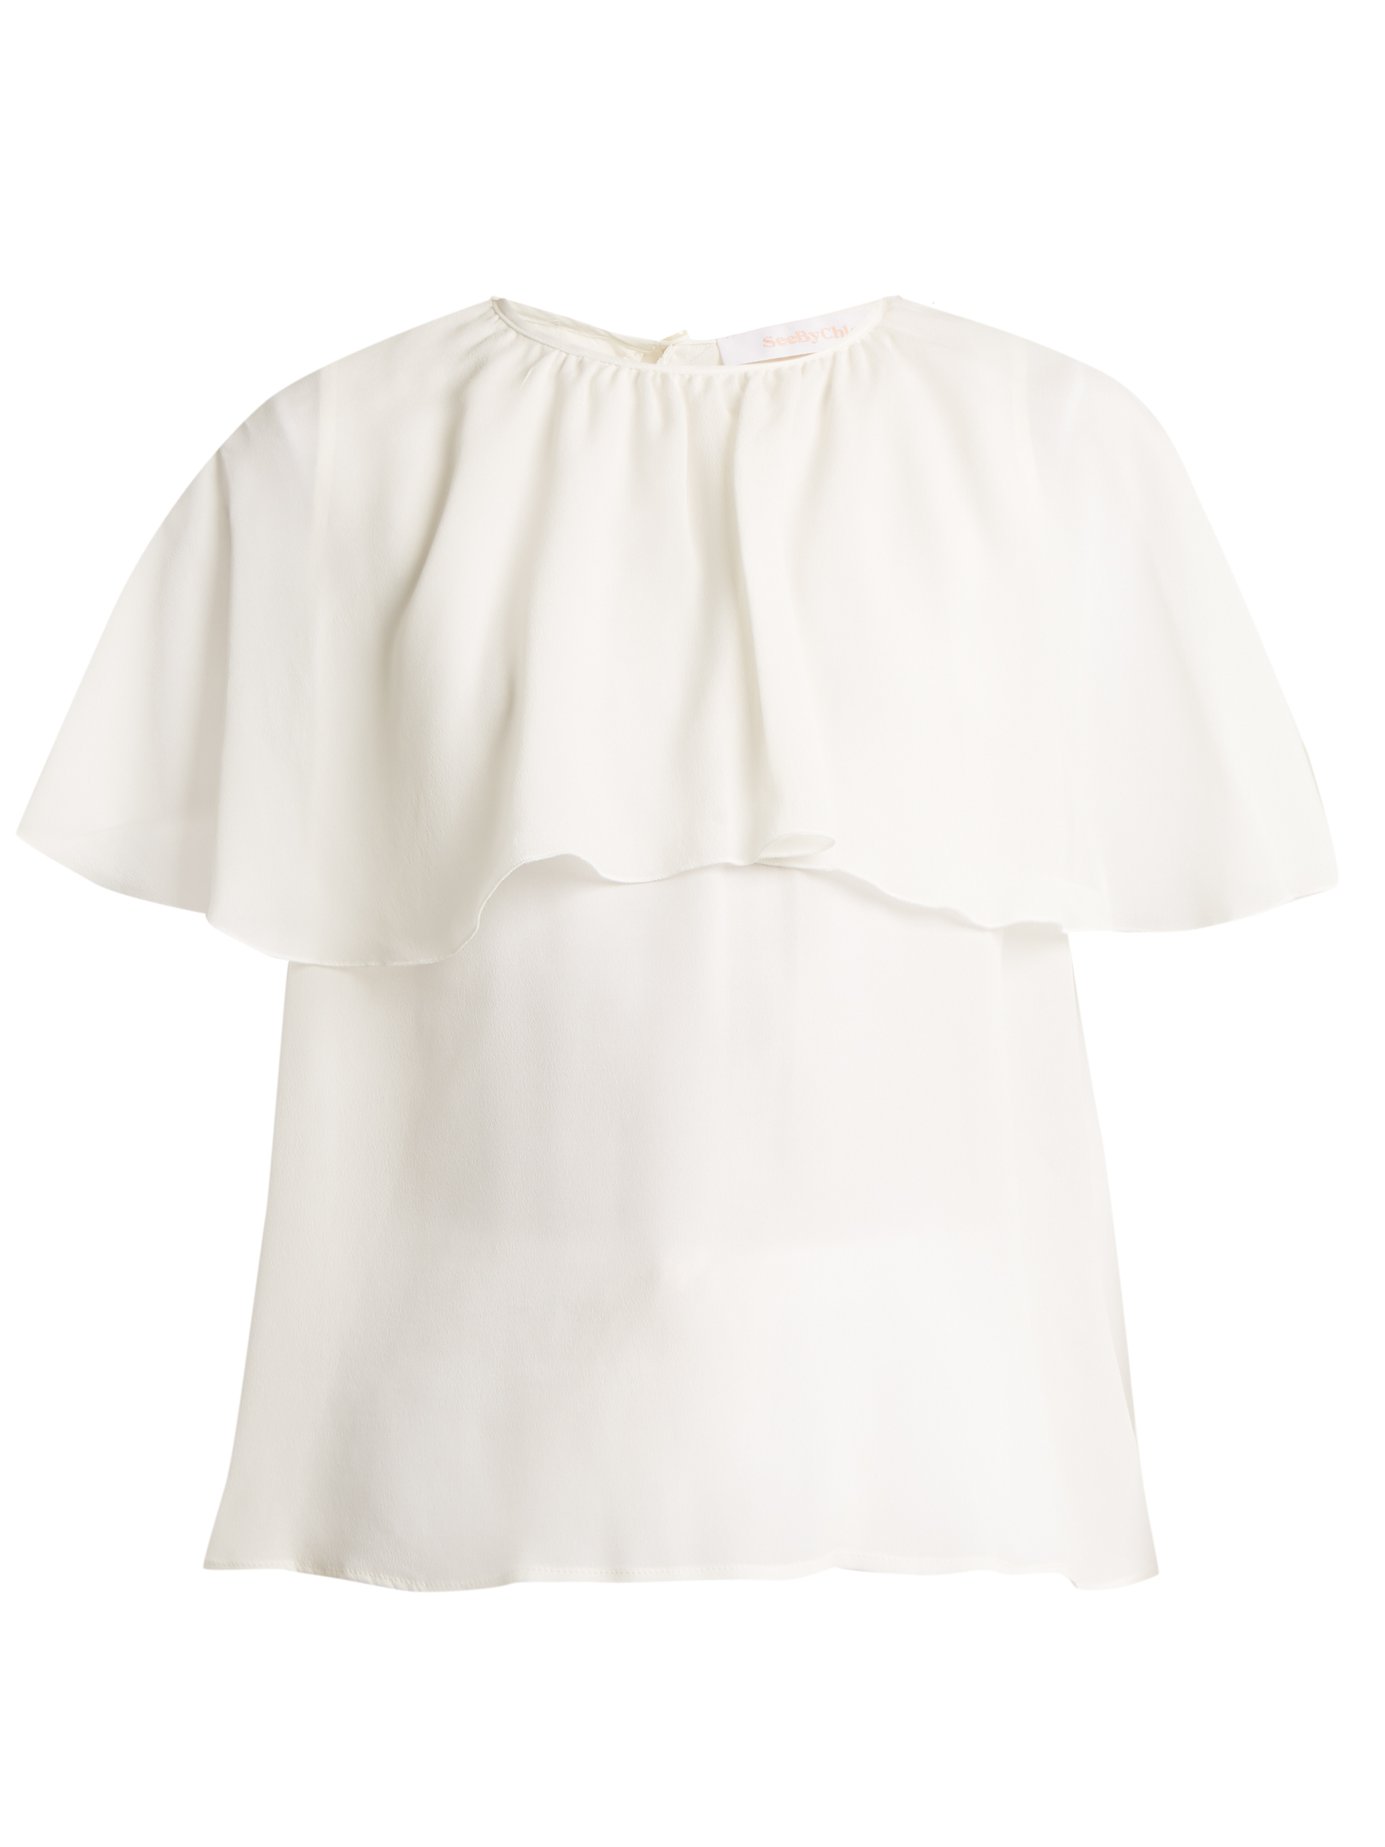 See By Chloé - Ruffle-Tiered Top - White | ABOUT ICONS